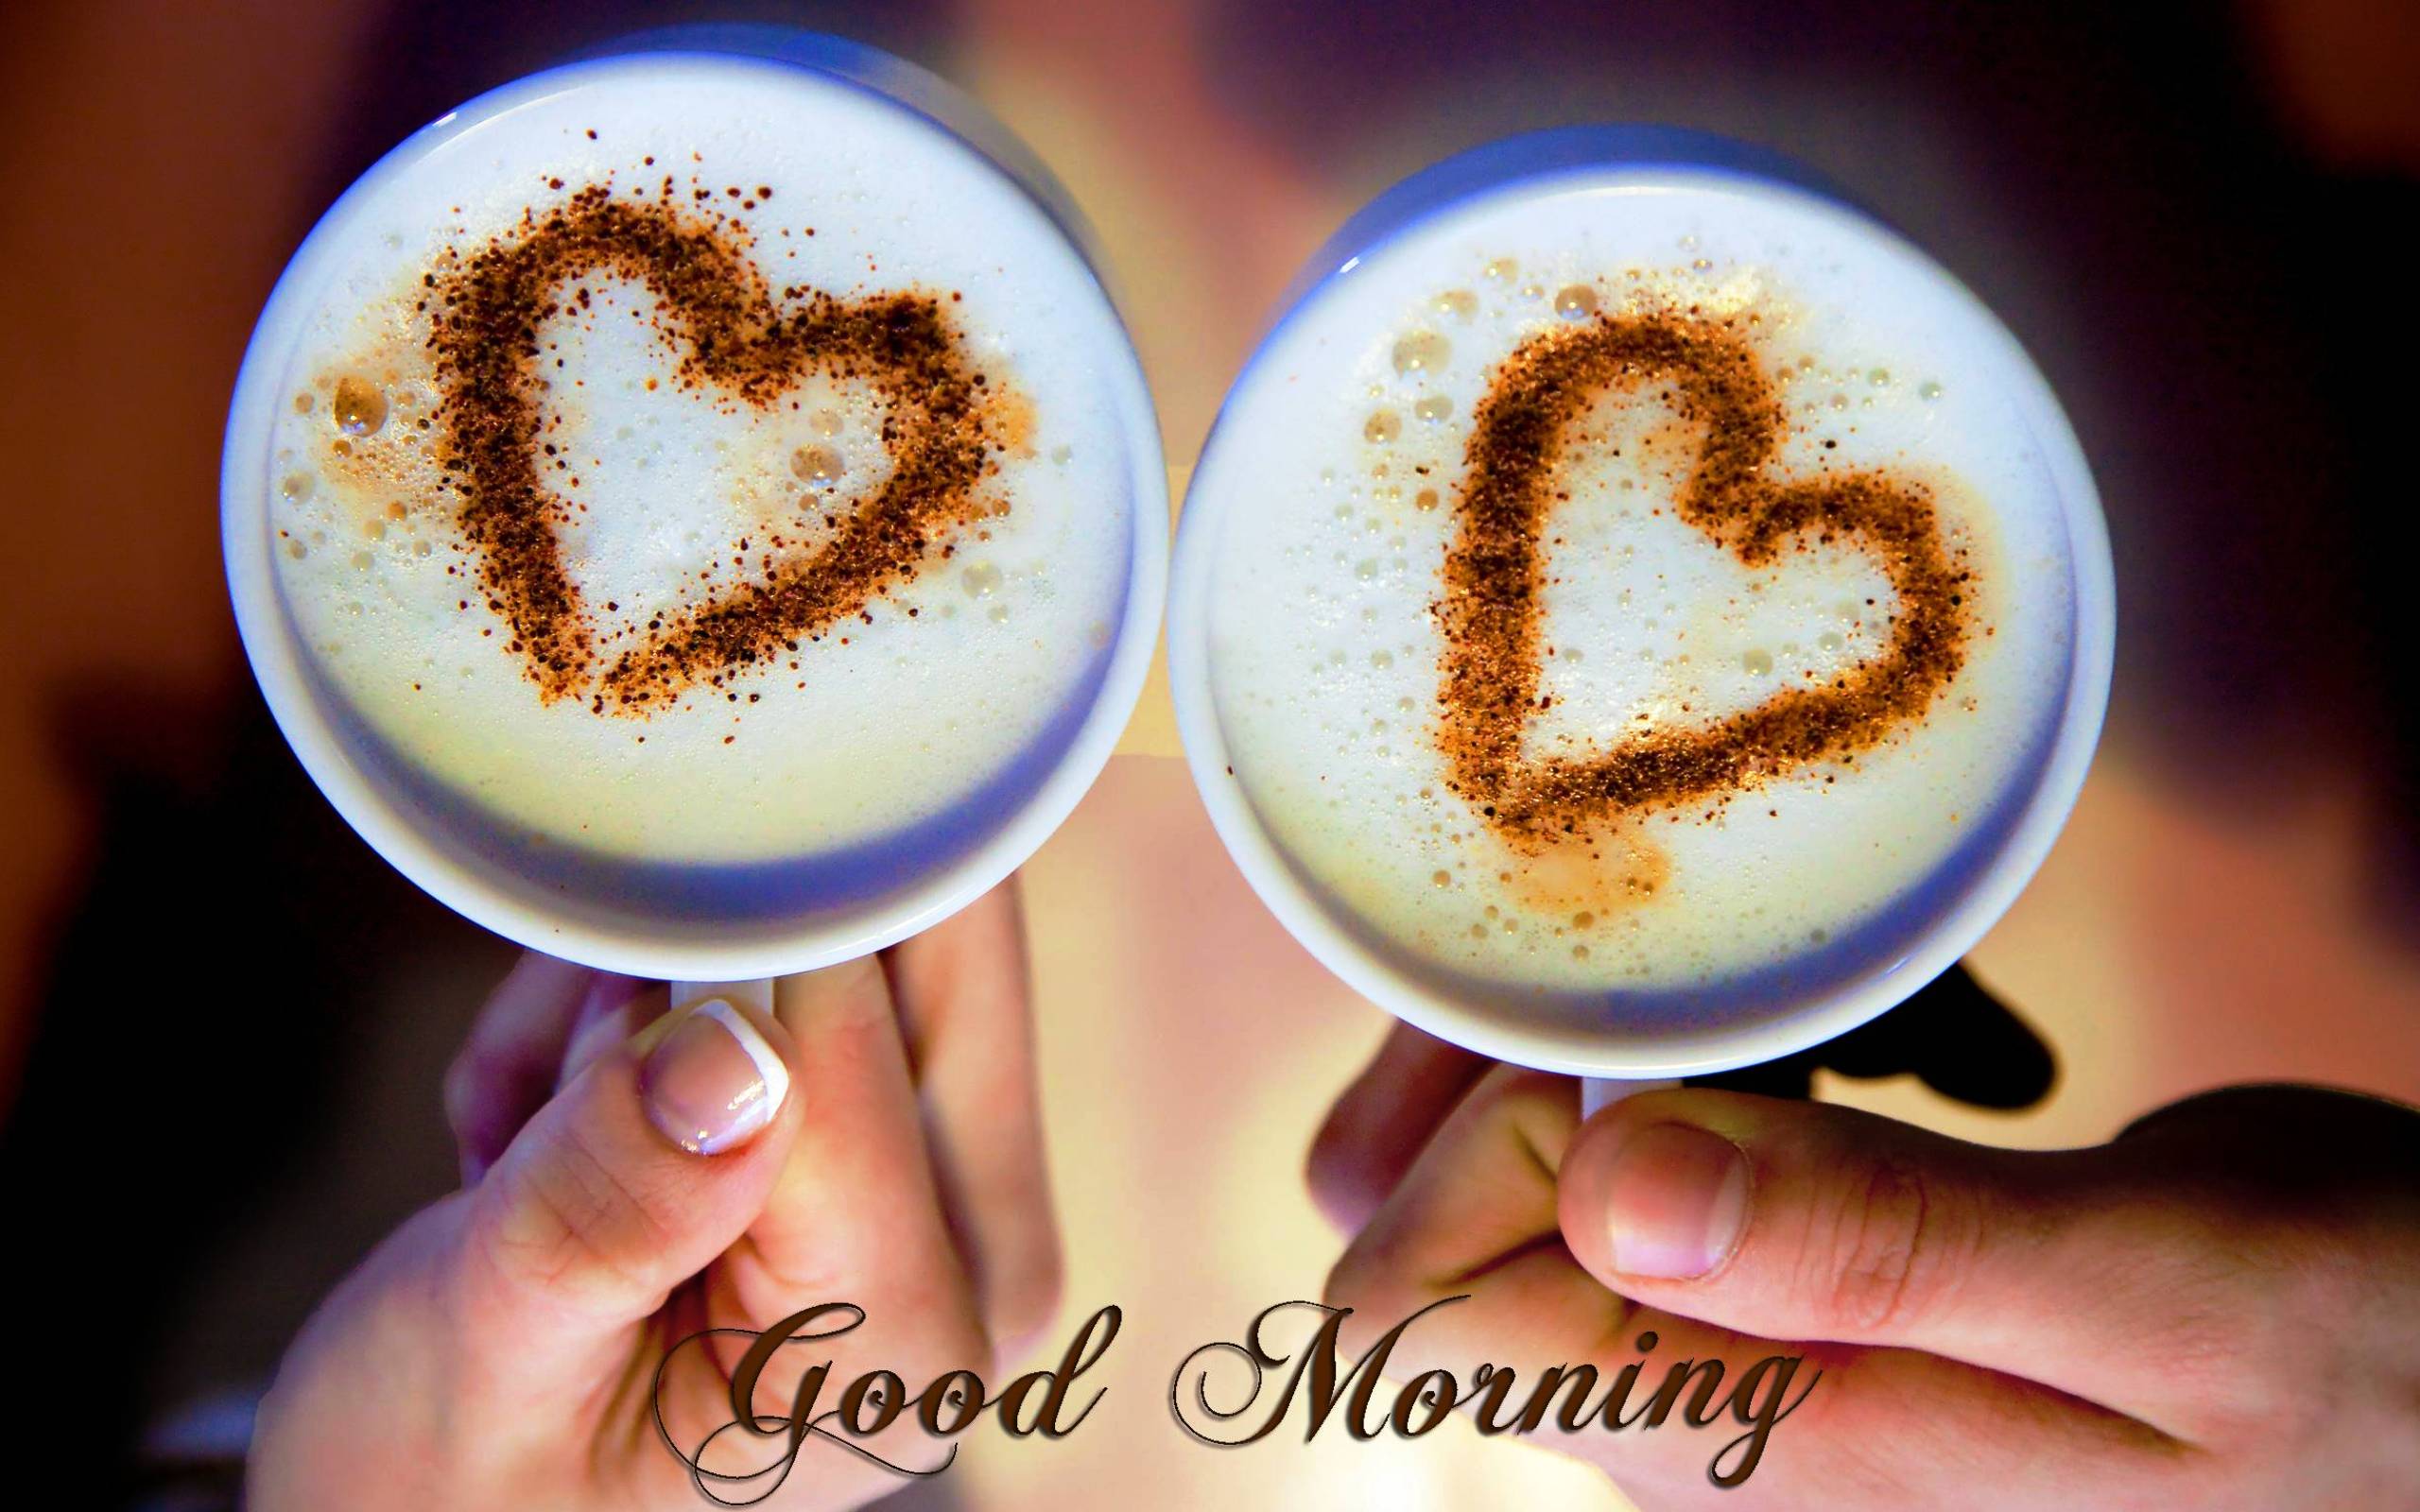 Good Morning – Coffee With Love